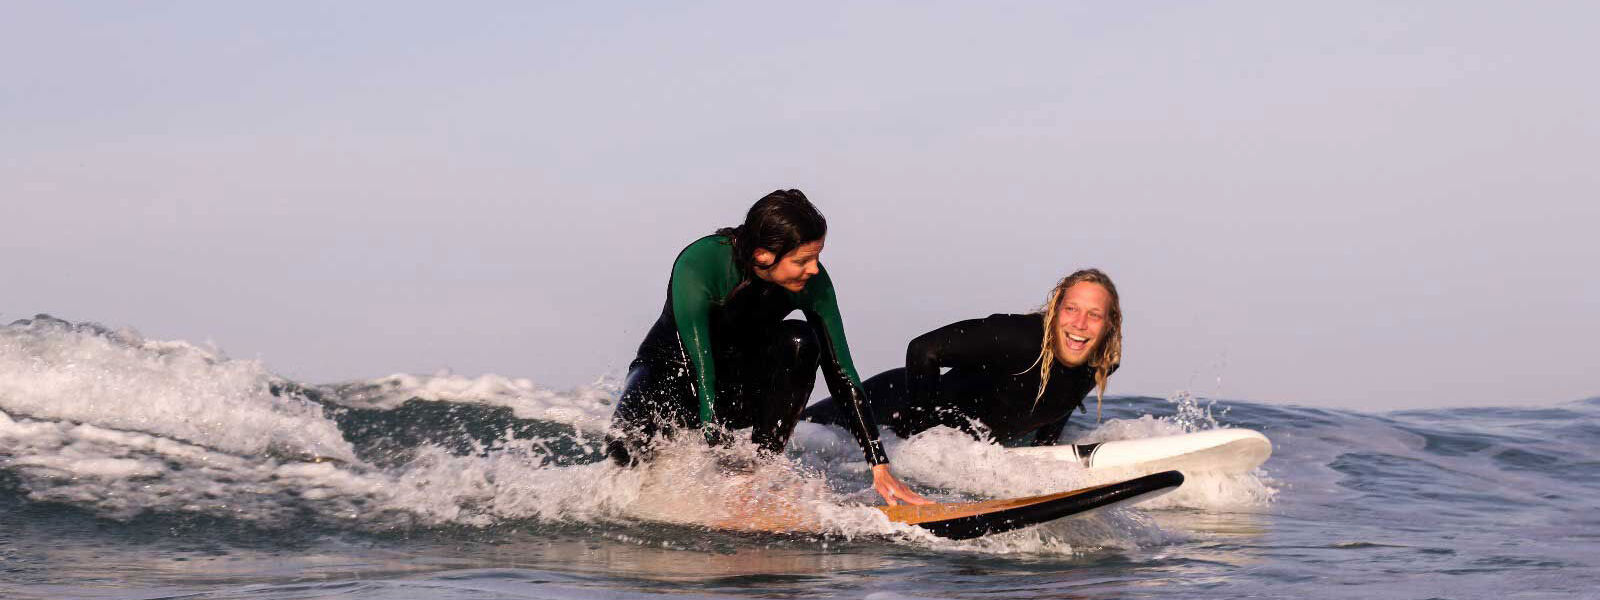 Surf lesson for beginners